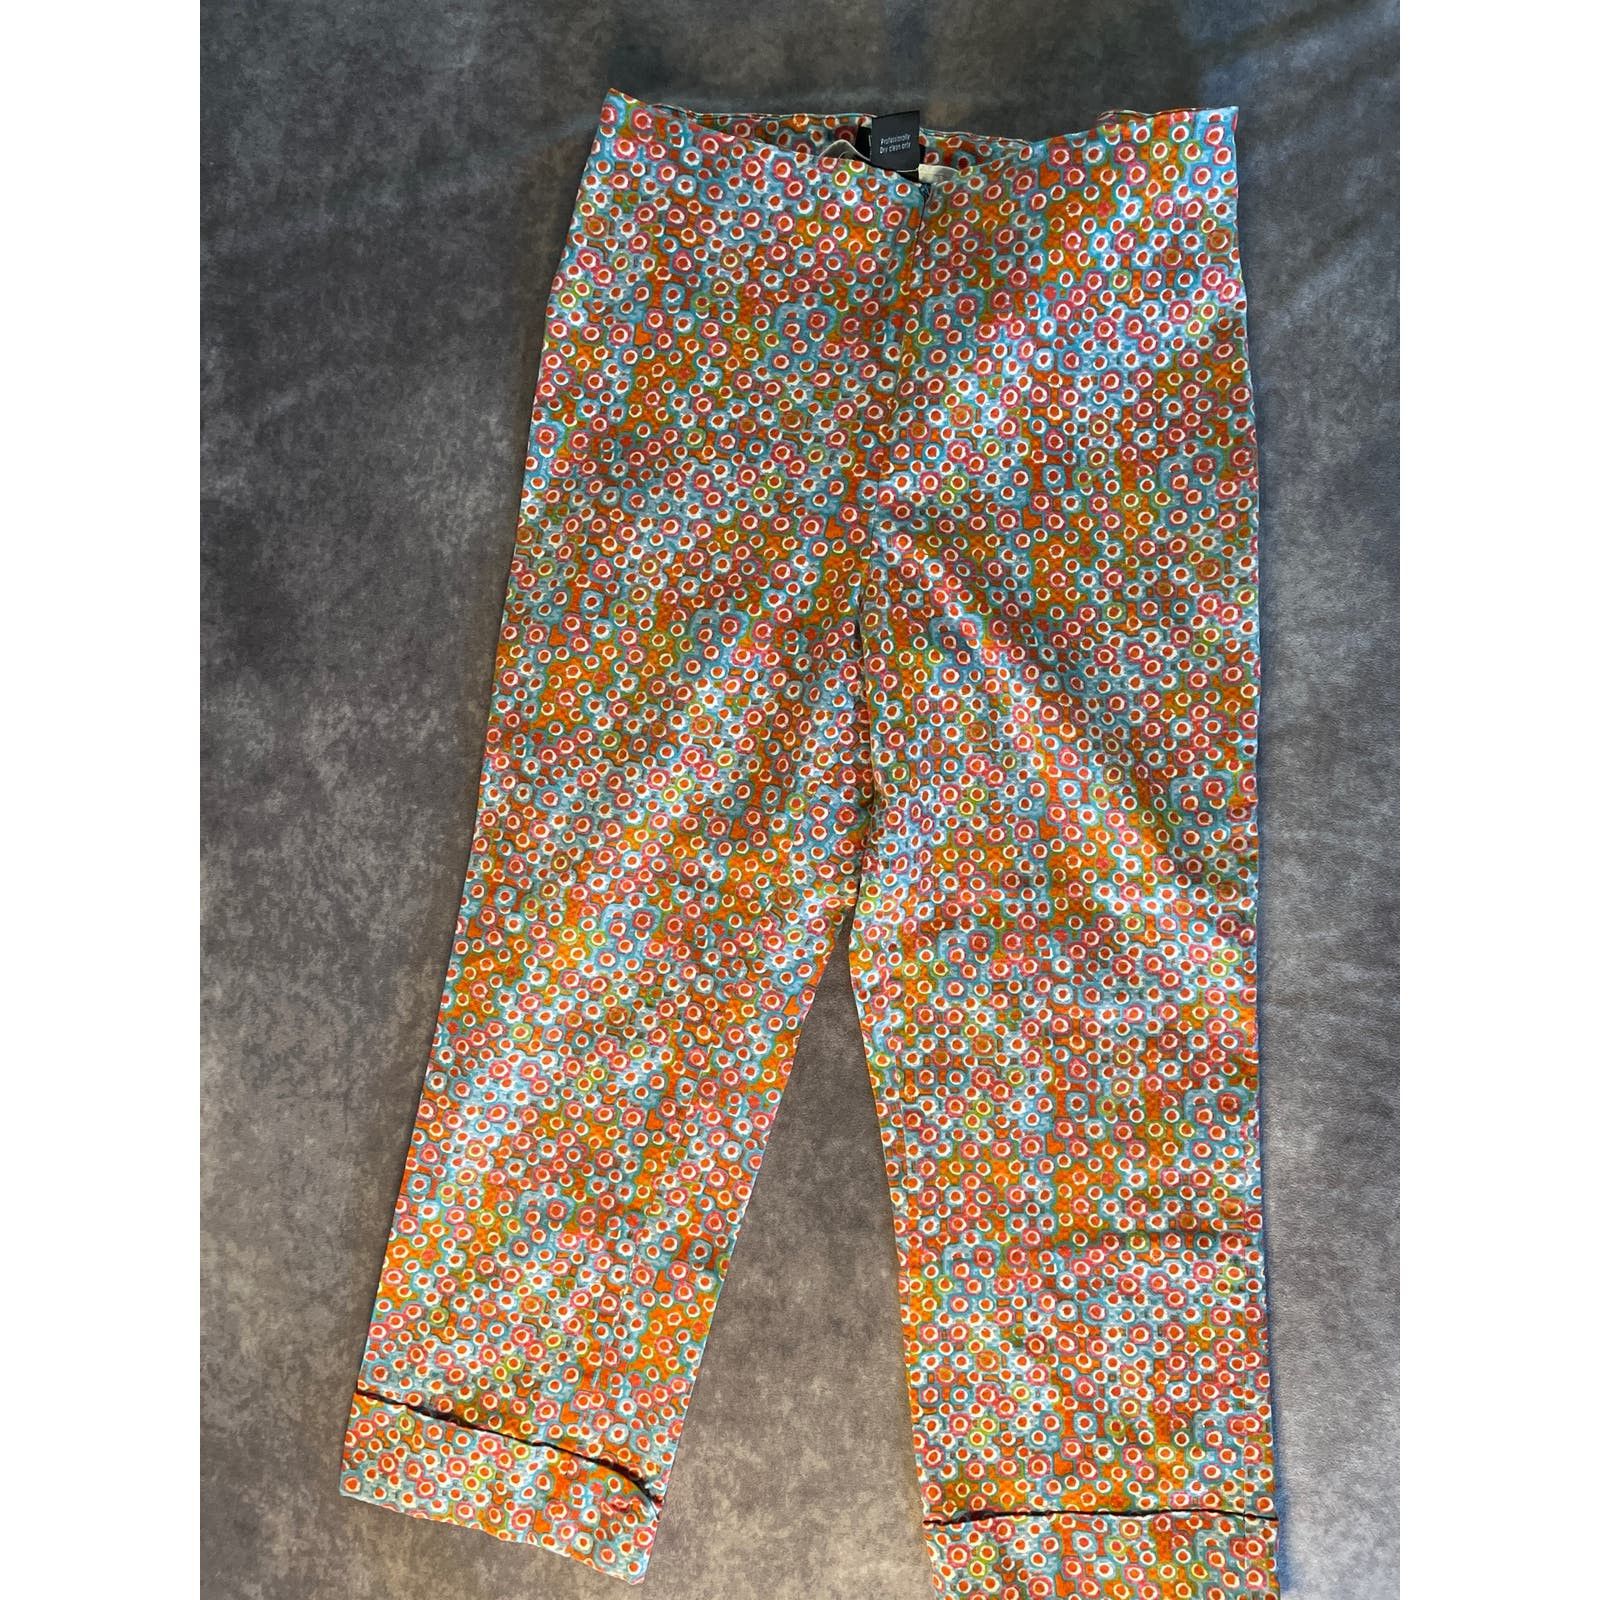 Willi Smith Willi Smith AOP Pants Size 26" / US 2 / IT 38 - 1 Preview